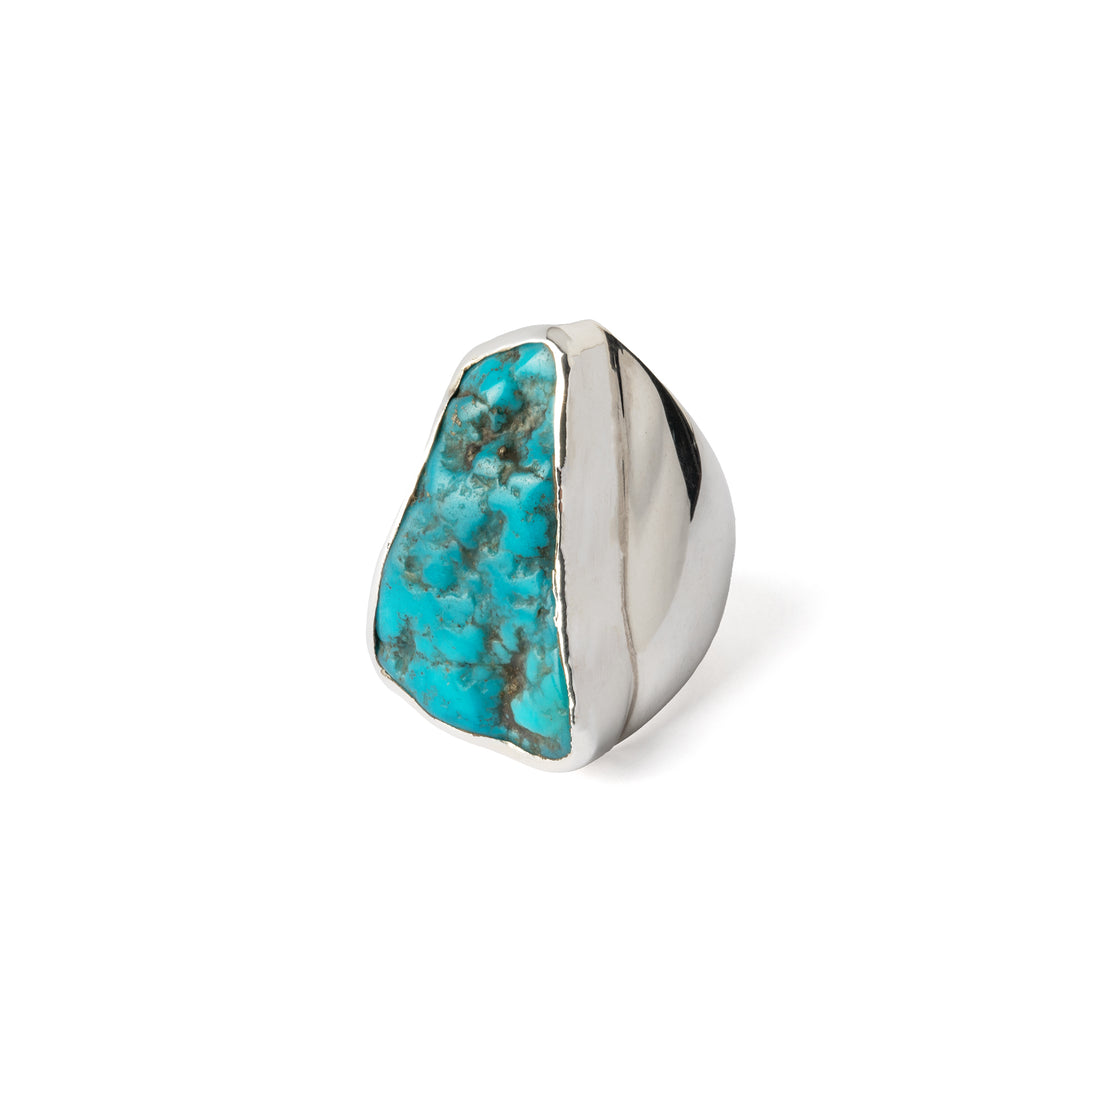 Hallmarked Silver Ring with rough American Turquoise |